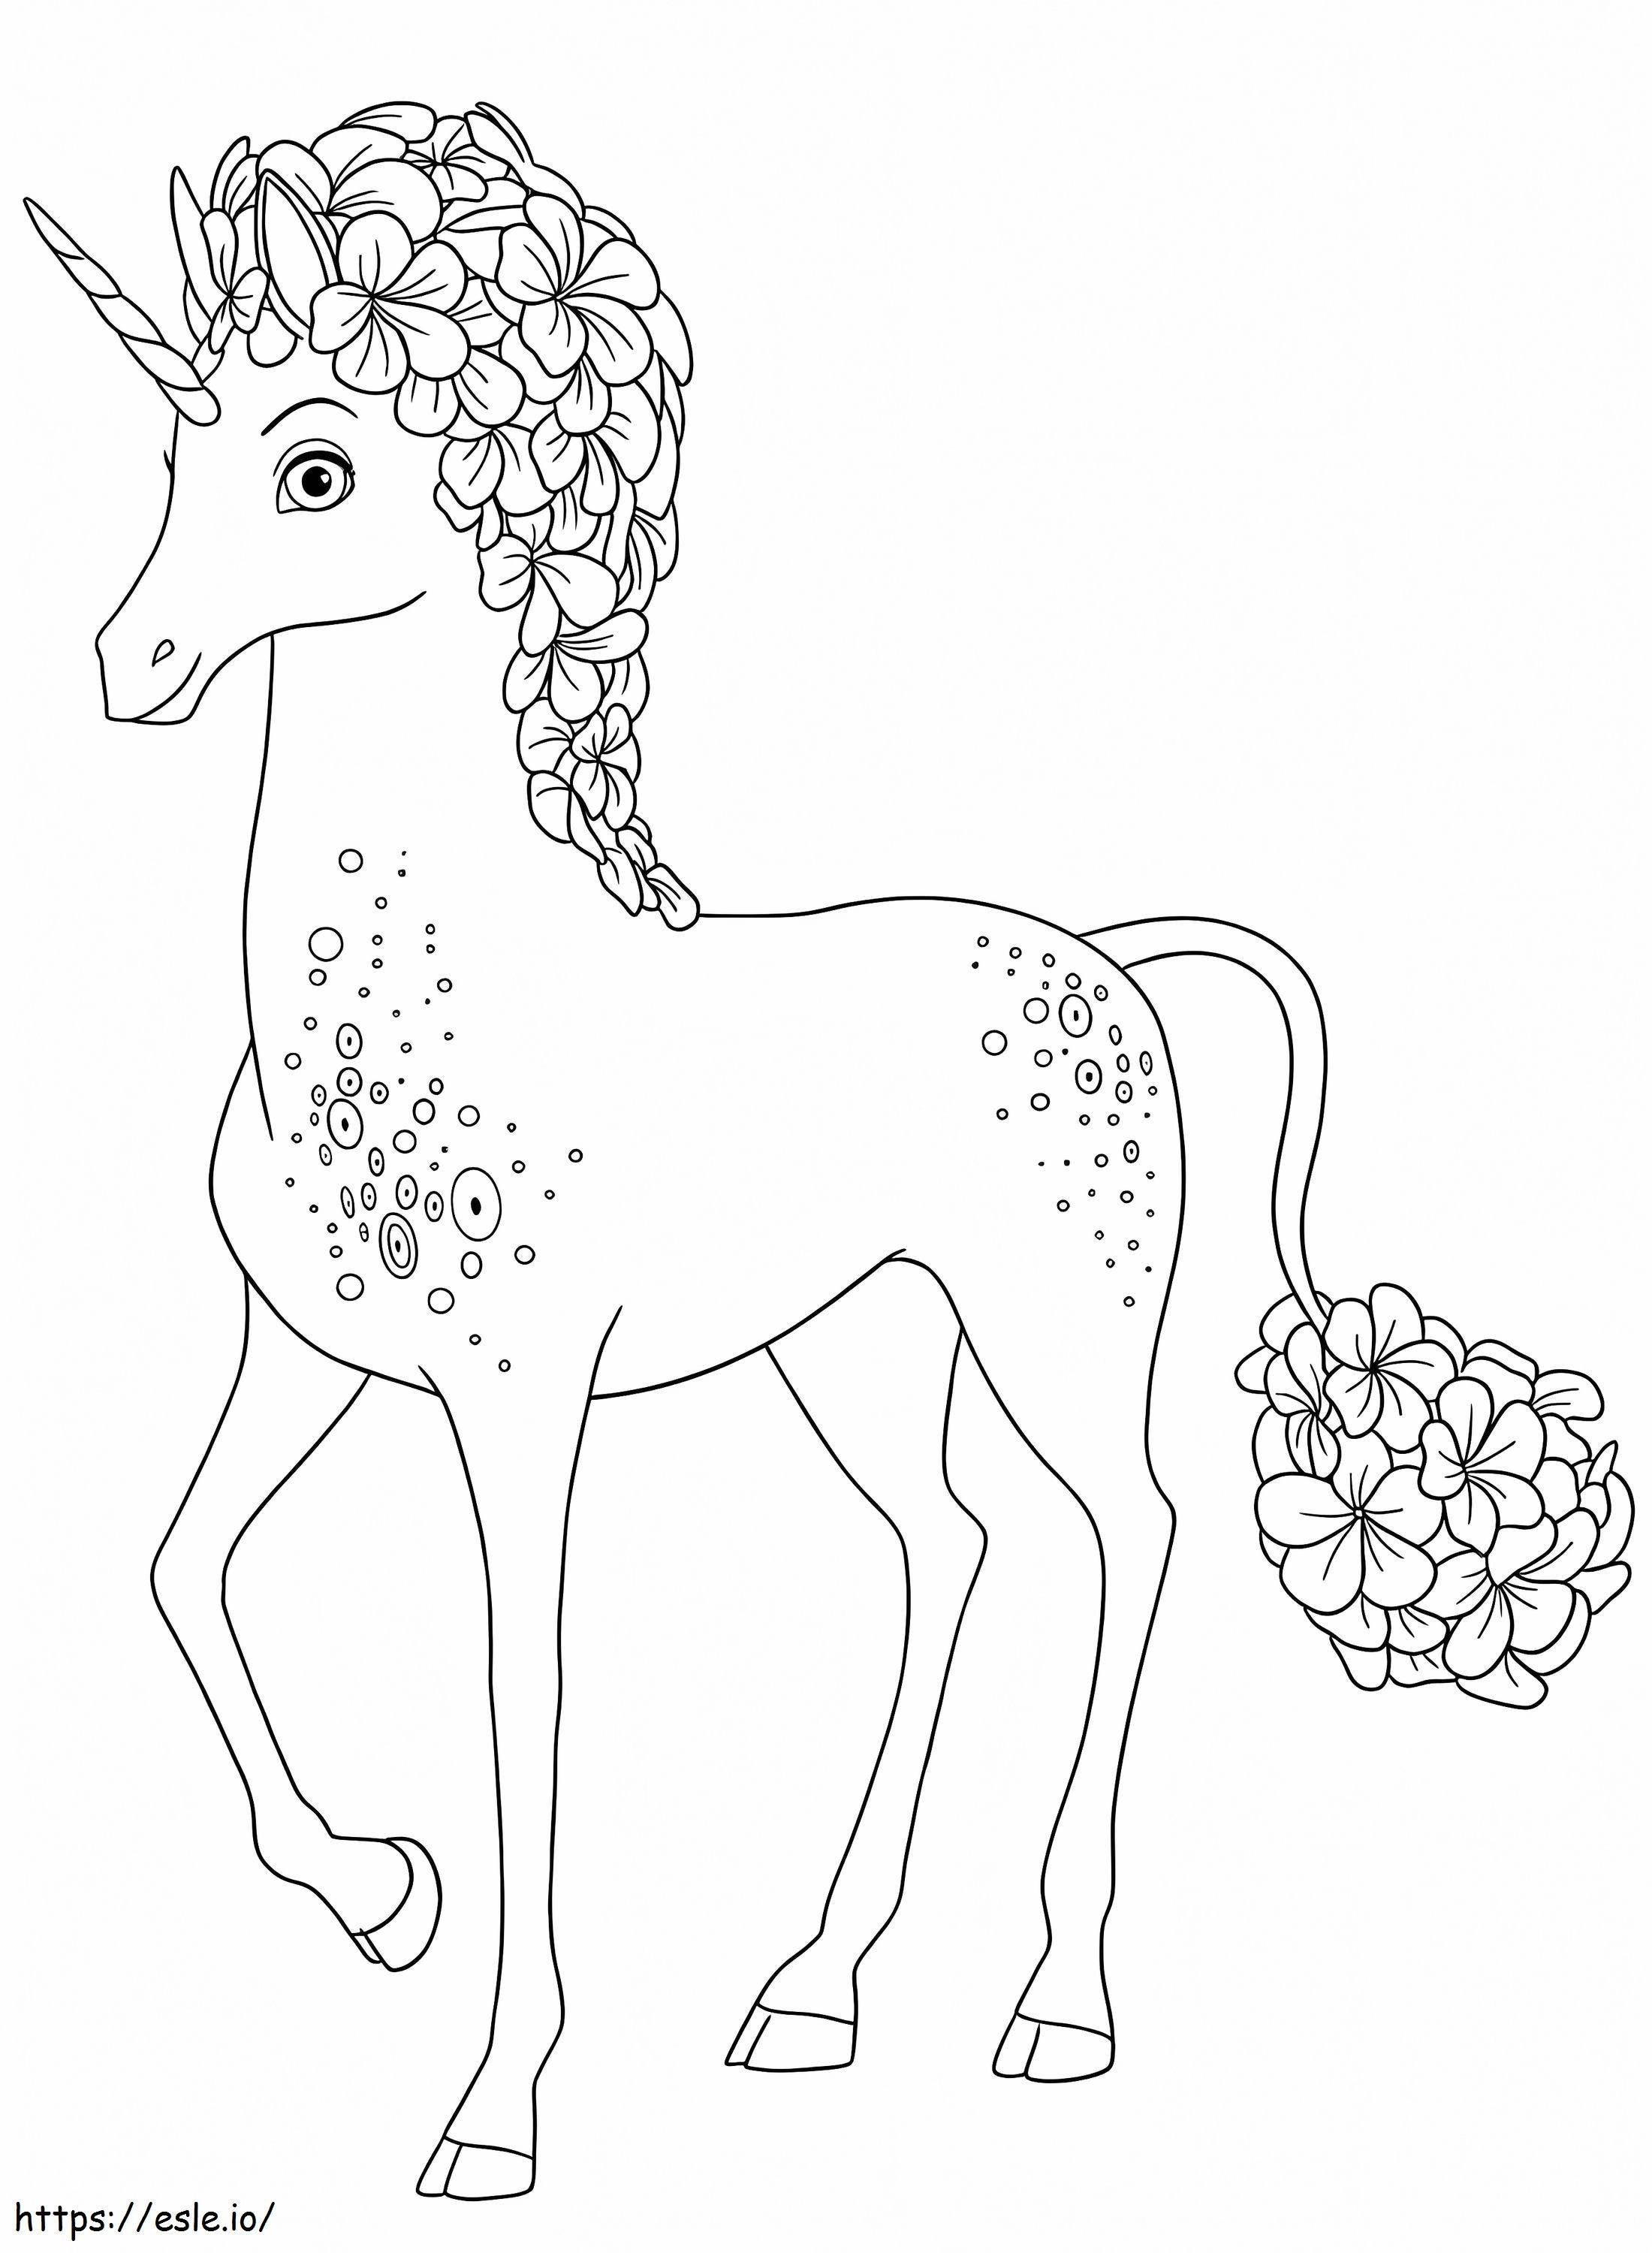 Balanda From Mia And Me coloring page